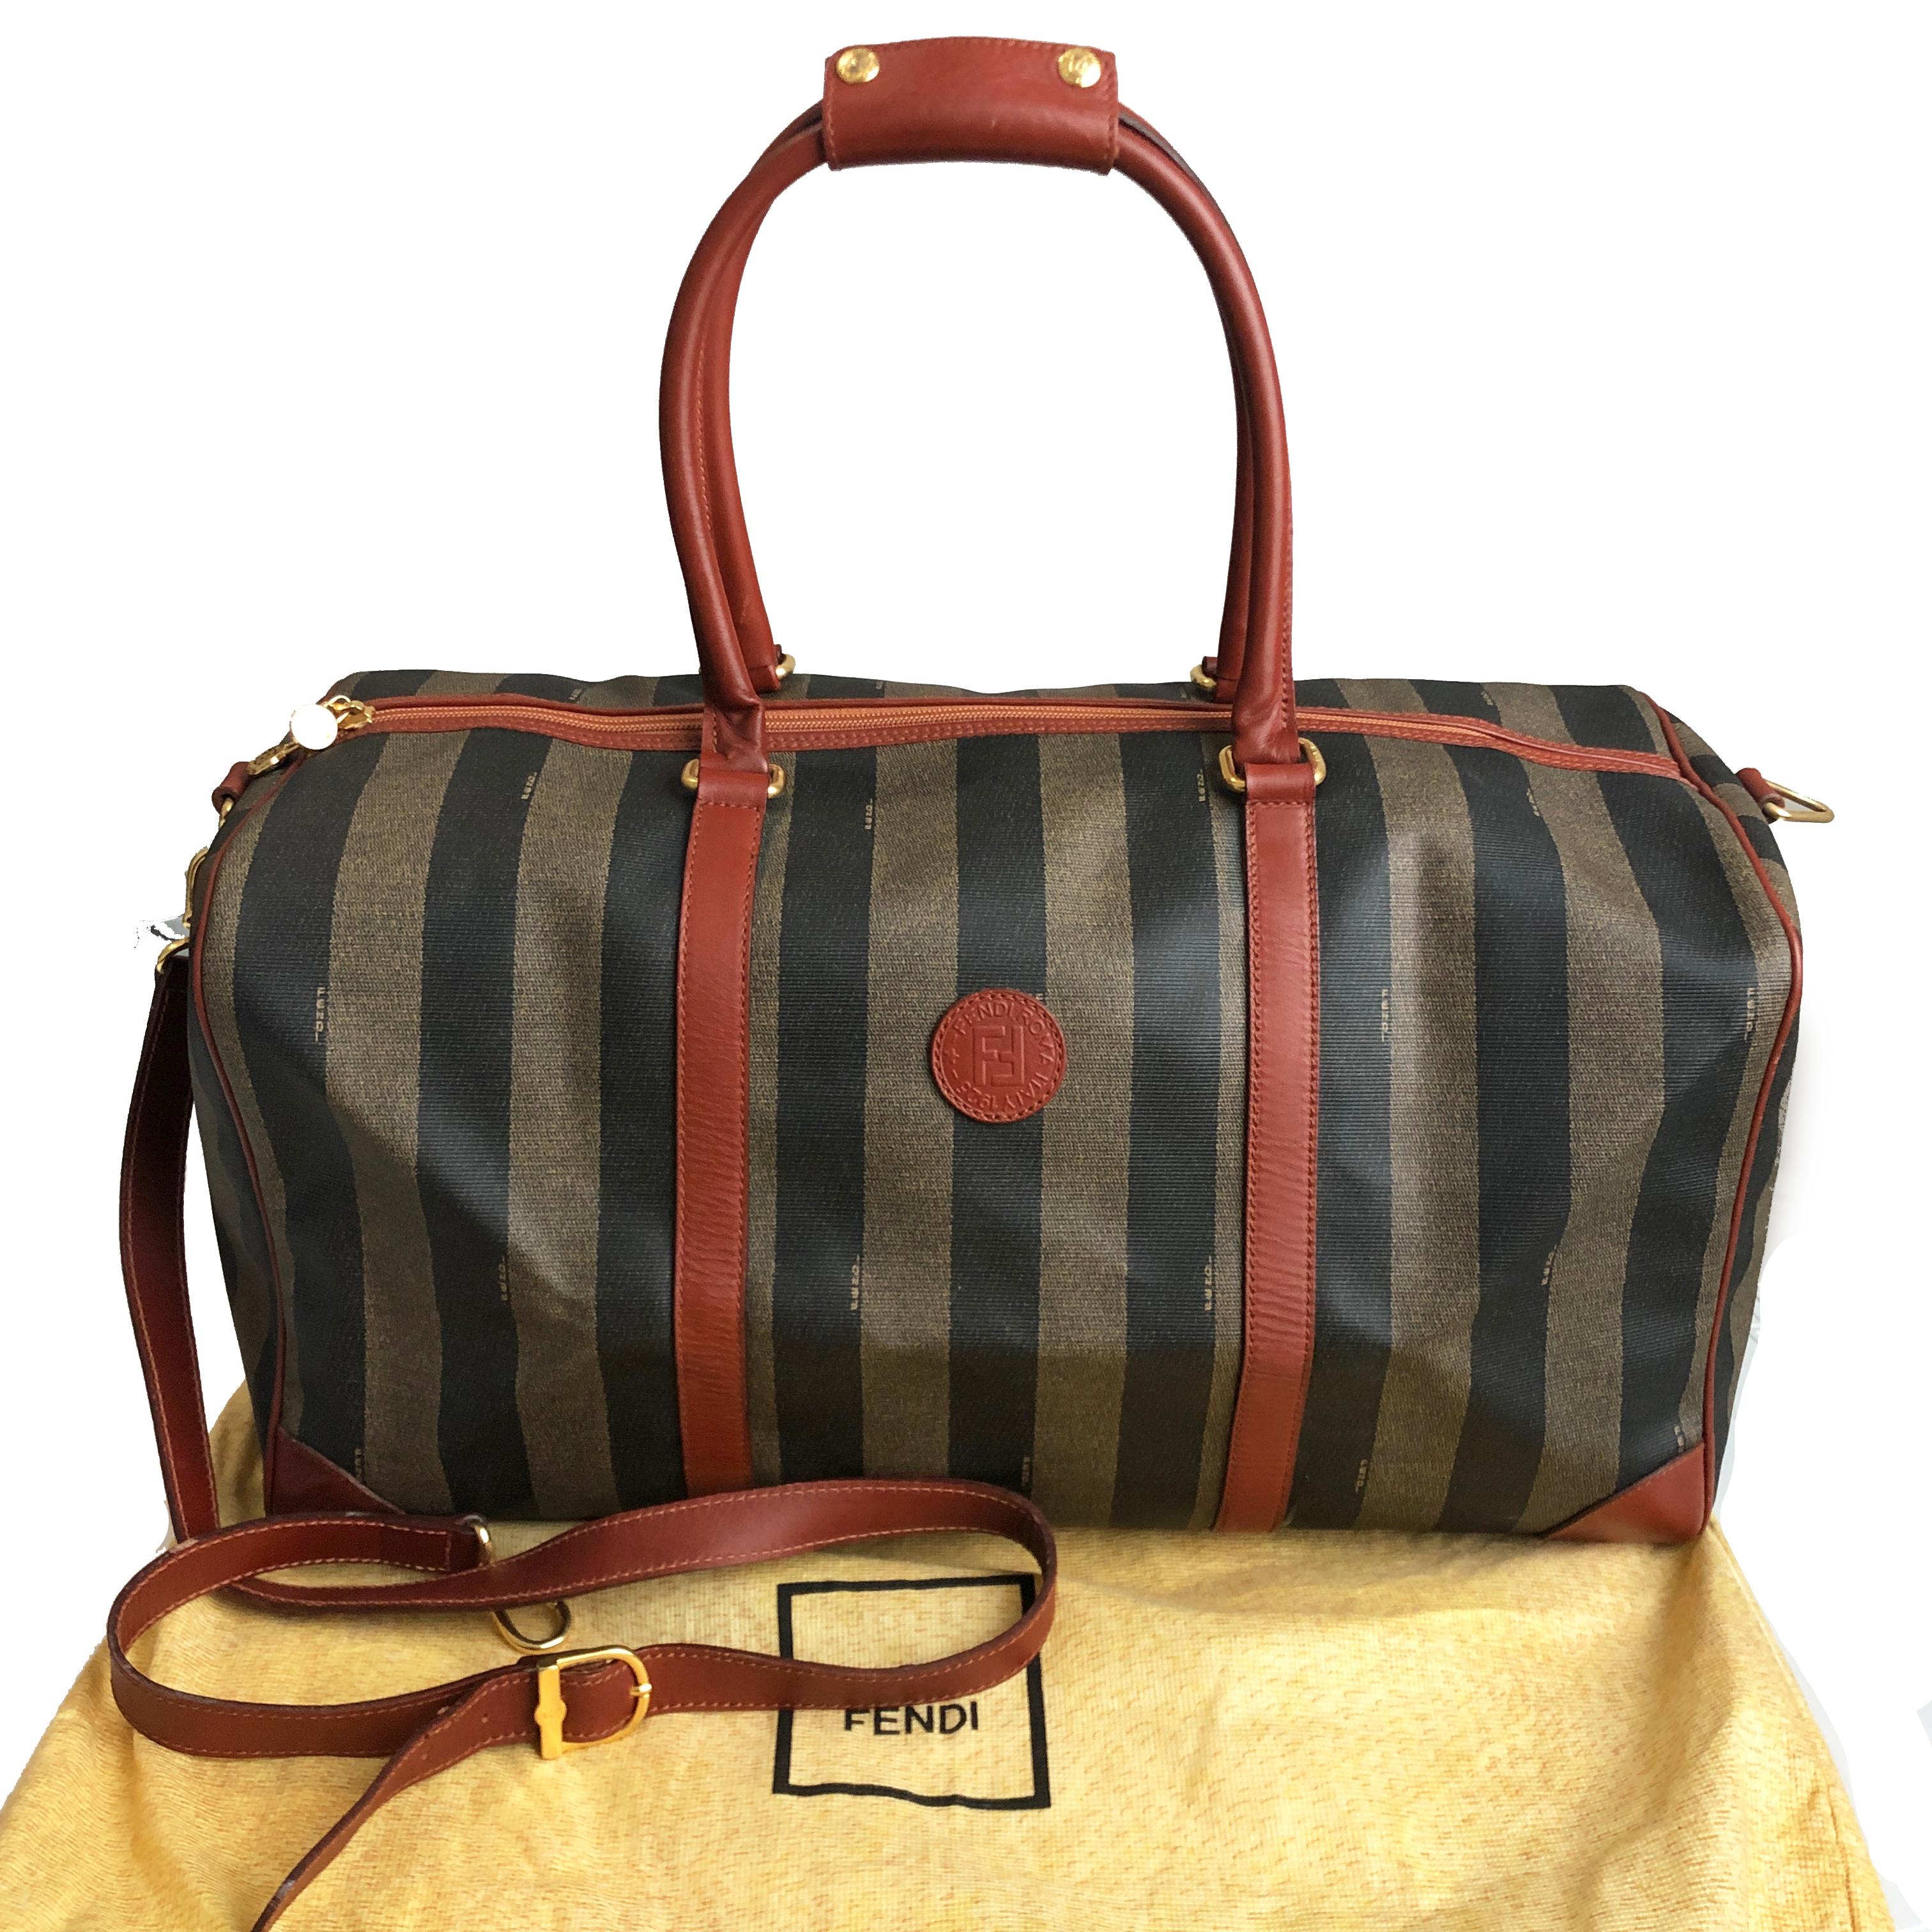 Authentic, preowned, vintage 80s FENDI Pequin striped canvas large duffle bag with leather trim & shoulder strap. Zipper fastener/lined in black fabric/one zip pocket/gold metal hardware. Preowned/vintage w/signs of use & prior wear: marks/spots to